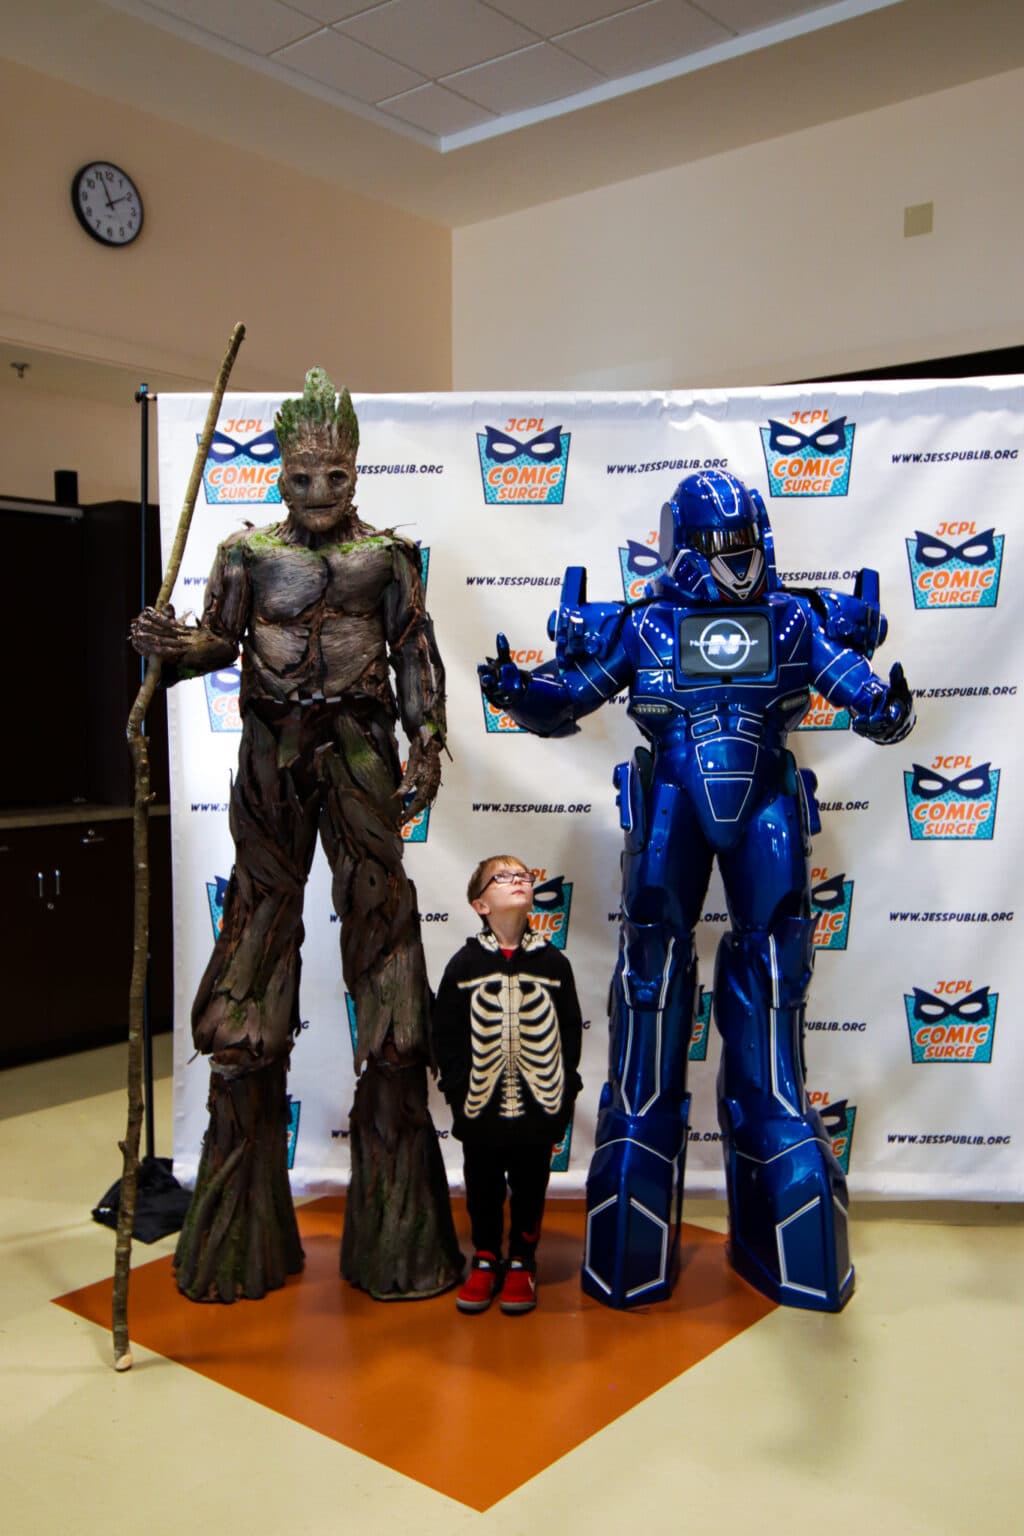 A small boy in a skeleton costume stands between Groot and the robot Big Blue. The boy looks up at Big Blue.